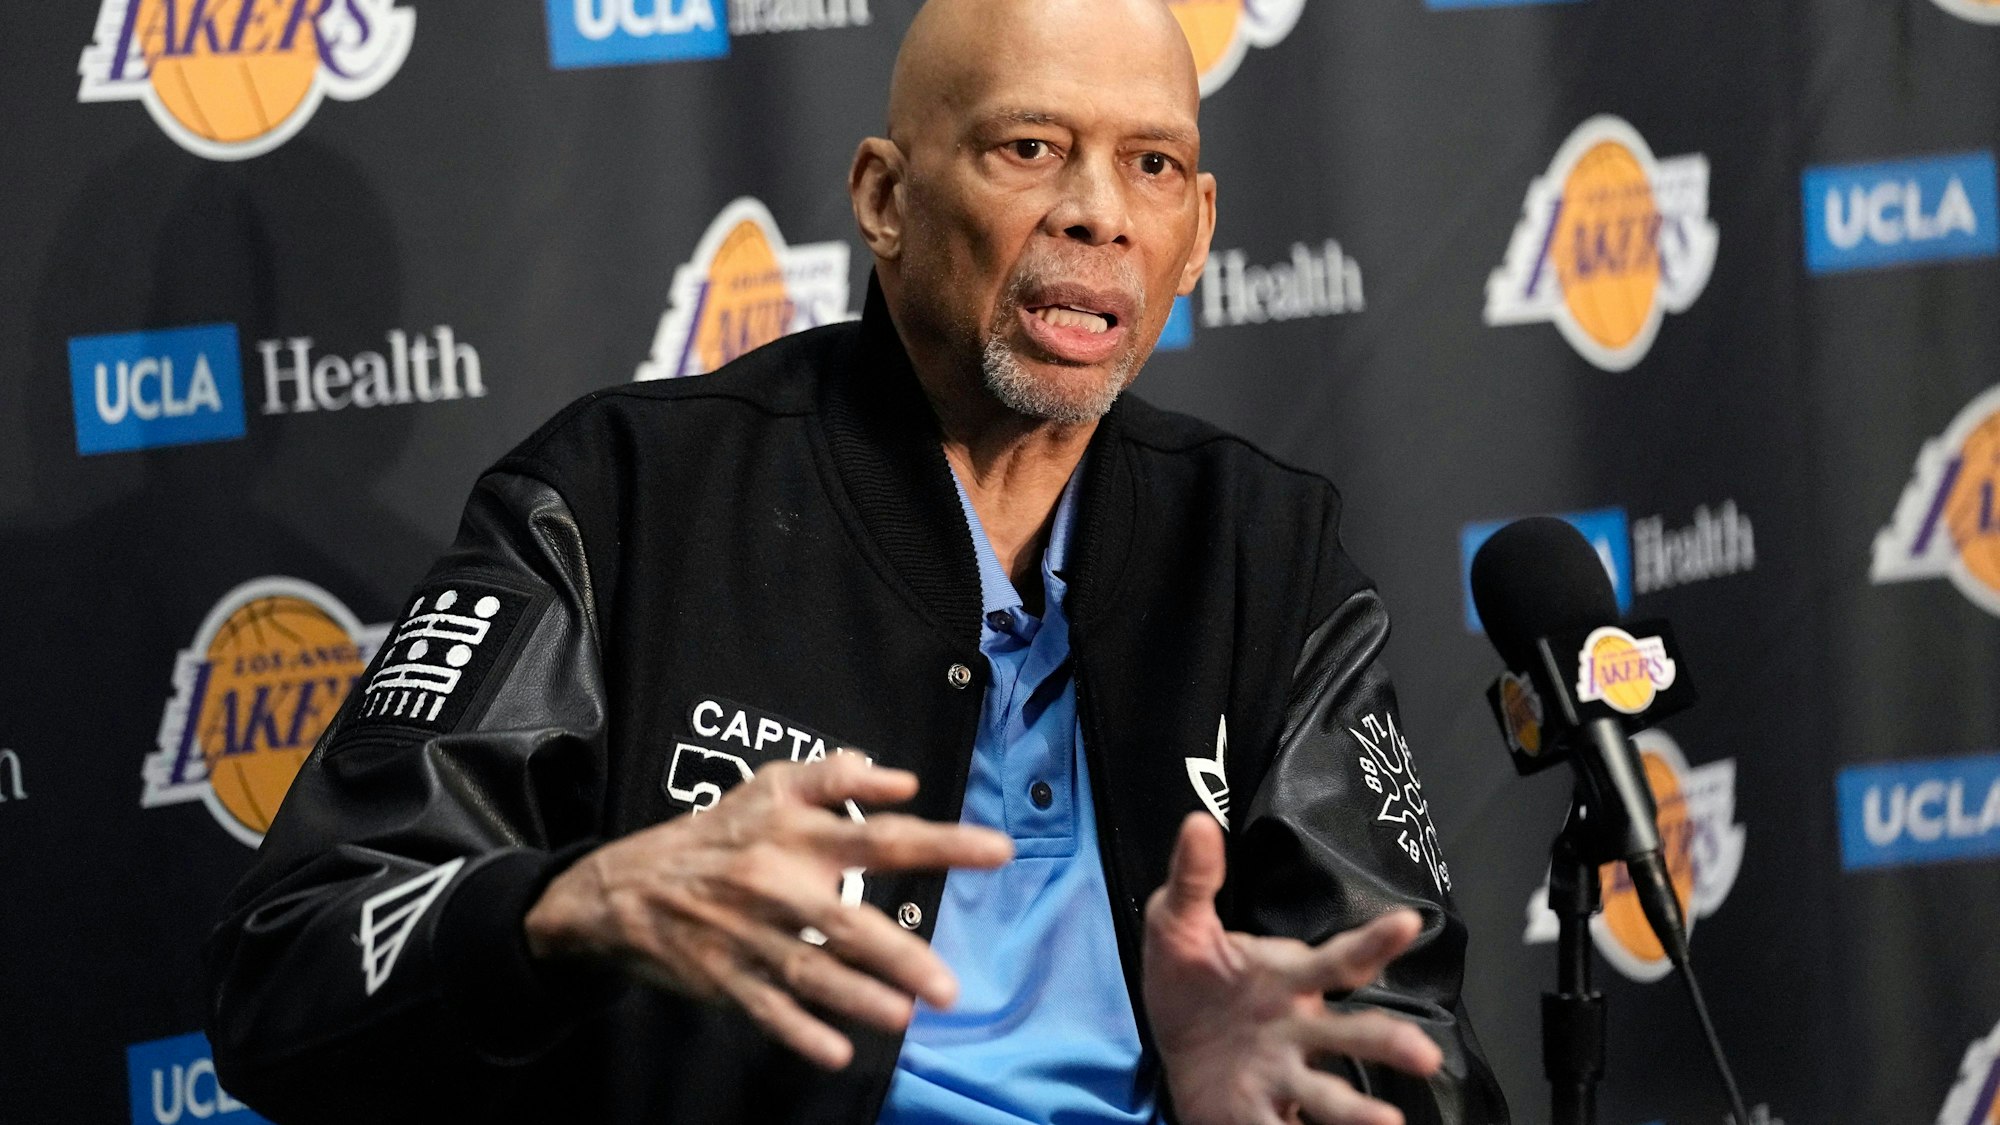 Kareem Abdul-Jabbar speaks during a news conference prior to an NBA basketball game between the Los Angeles Lakers and the Milwaukee Bucks Thursday, Feb. 9, 2023, in Los Angeles. Kareem Abdul-Jabbar fell at a concert in Los Angeles and broke his hip. The NBA Hall of Famer was attending a show Friday night Dec. 15, 2023 when he was injured. Paramedics at the undisclosed venue responded and the 76-year-old was transported to a hospital for treatment. (AP Photo/Mark J. Terrill)